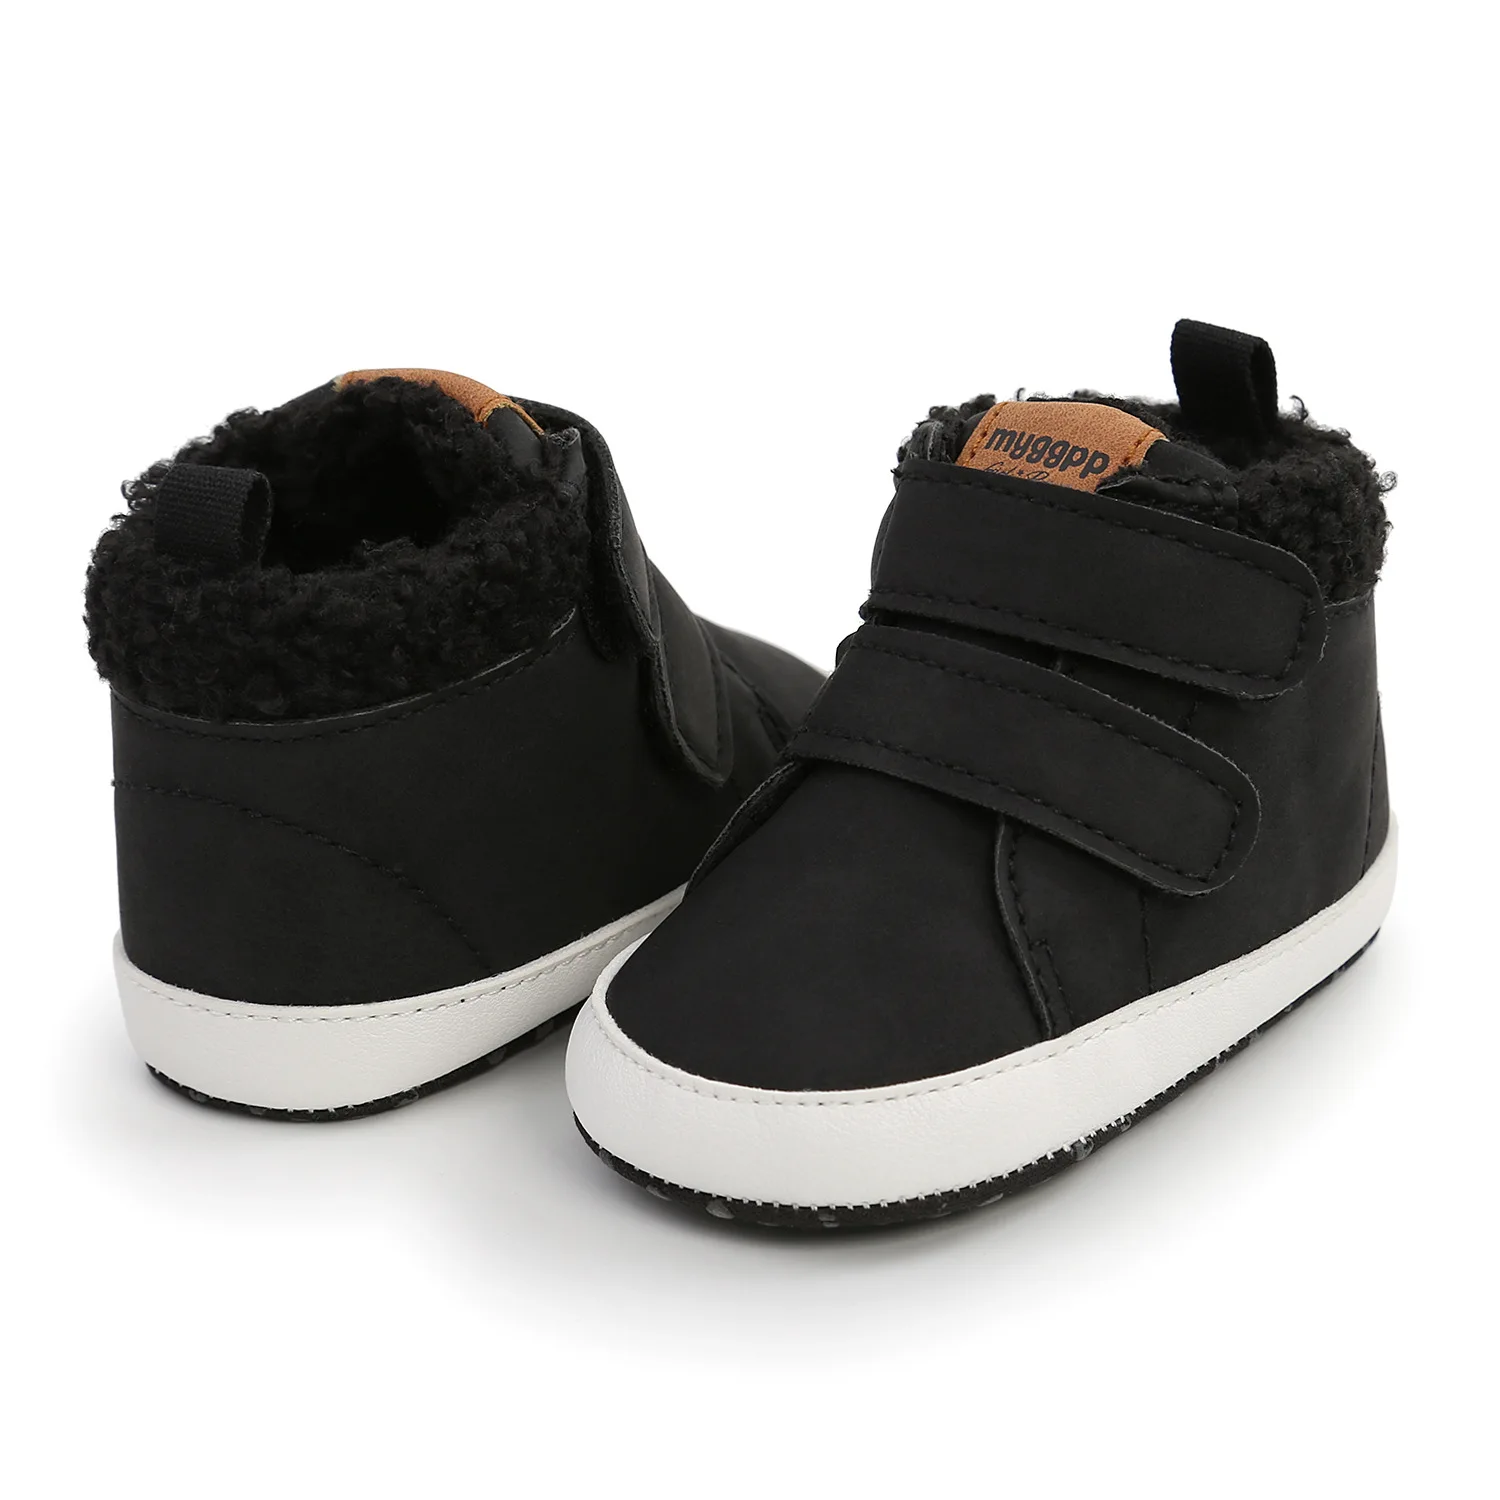 New Baby Boys Girls High Top Cotton Toddler Boots Newborns Prewalkers Winter Keep Warm Moccasins Footwear Shoes First Walkers images - 6